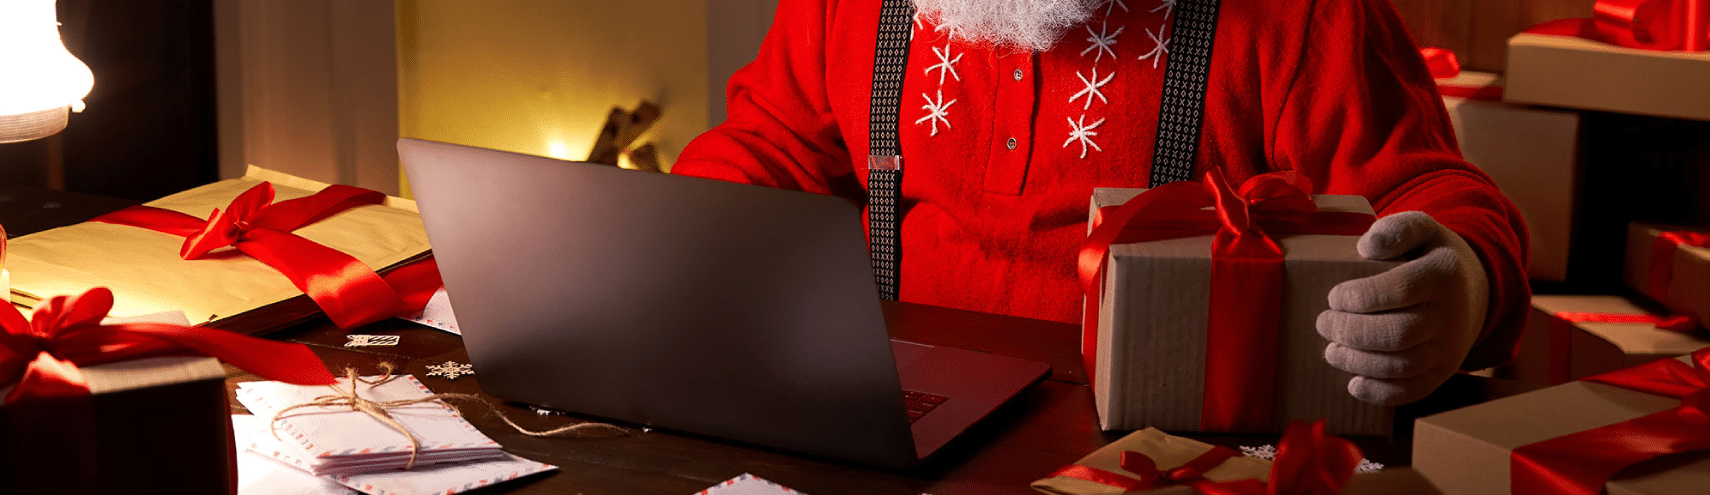 Santa sitting on his desk with a laptop, gift box, and packaging envelopes.